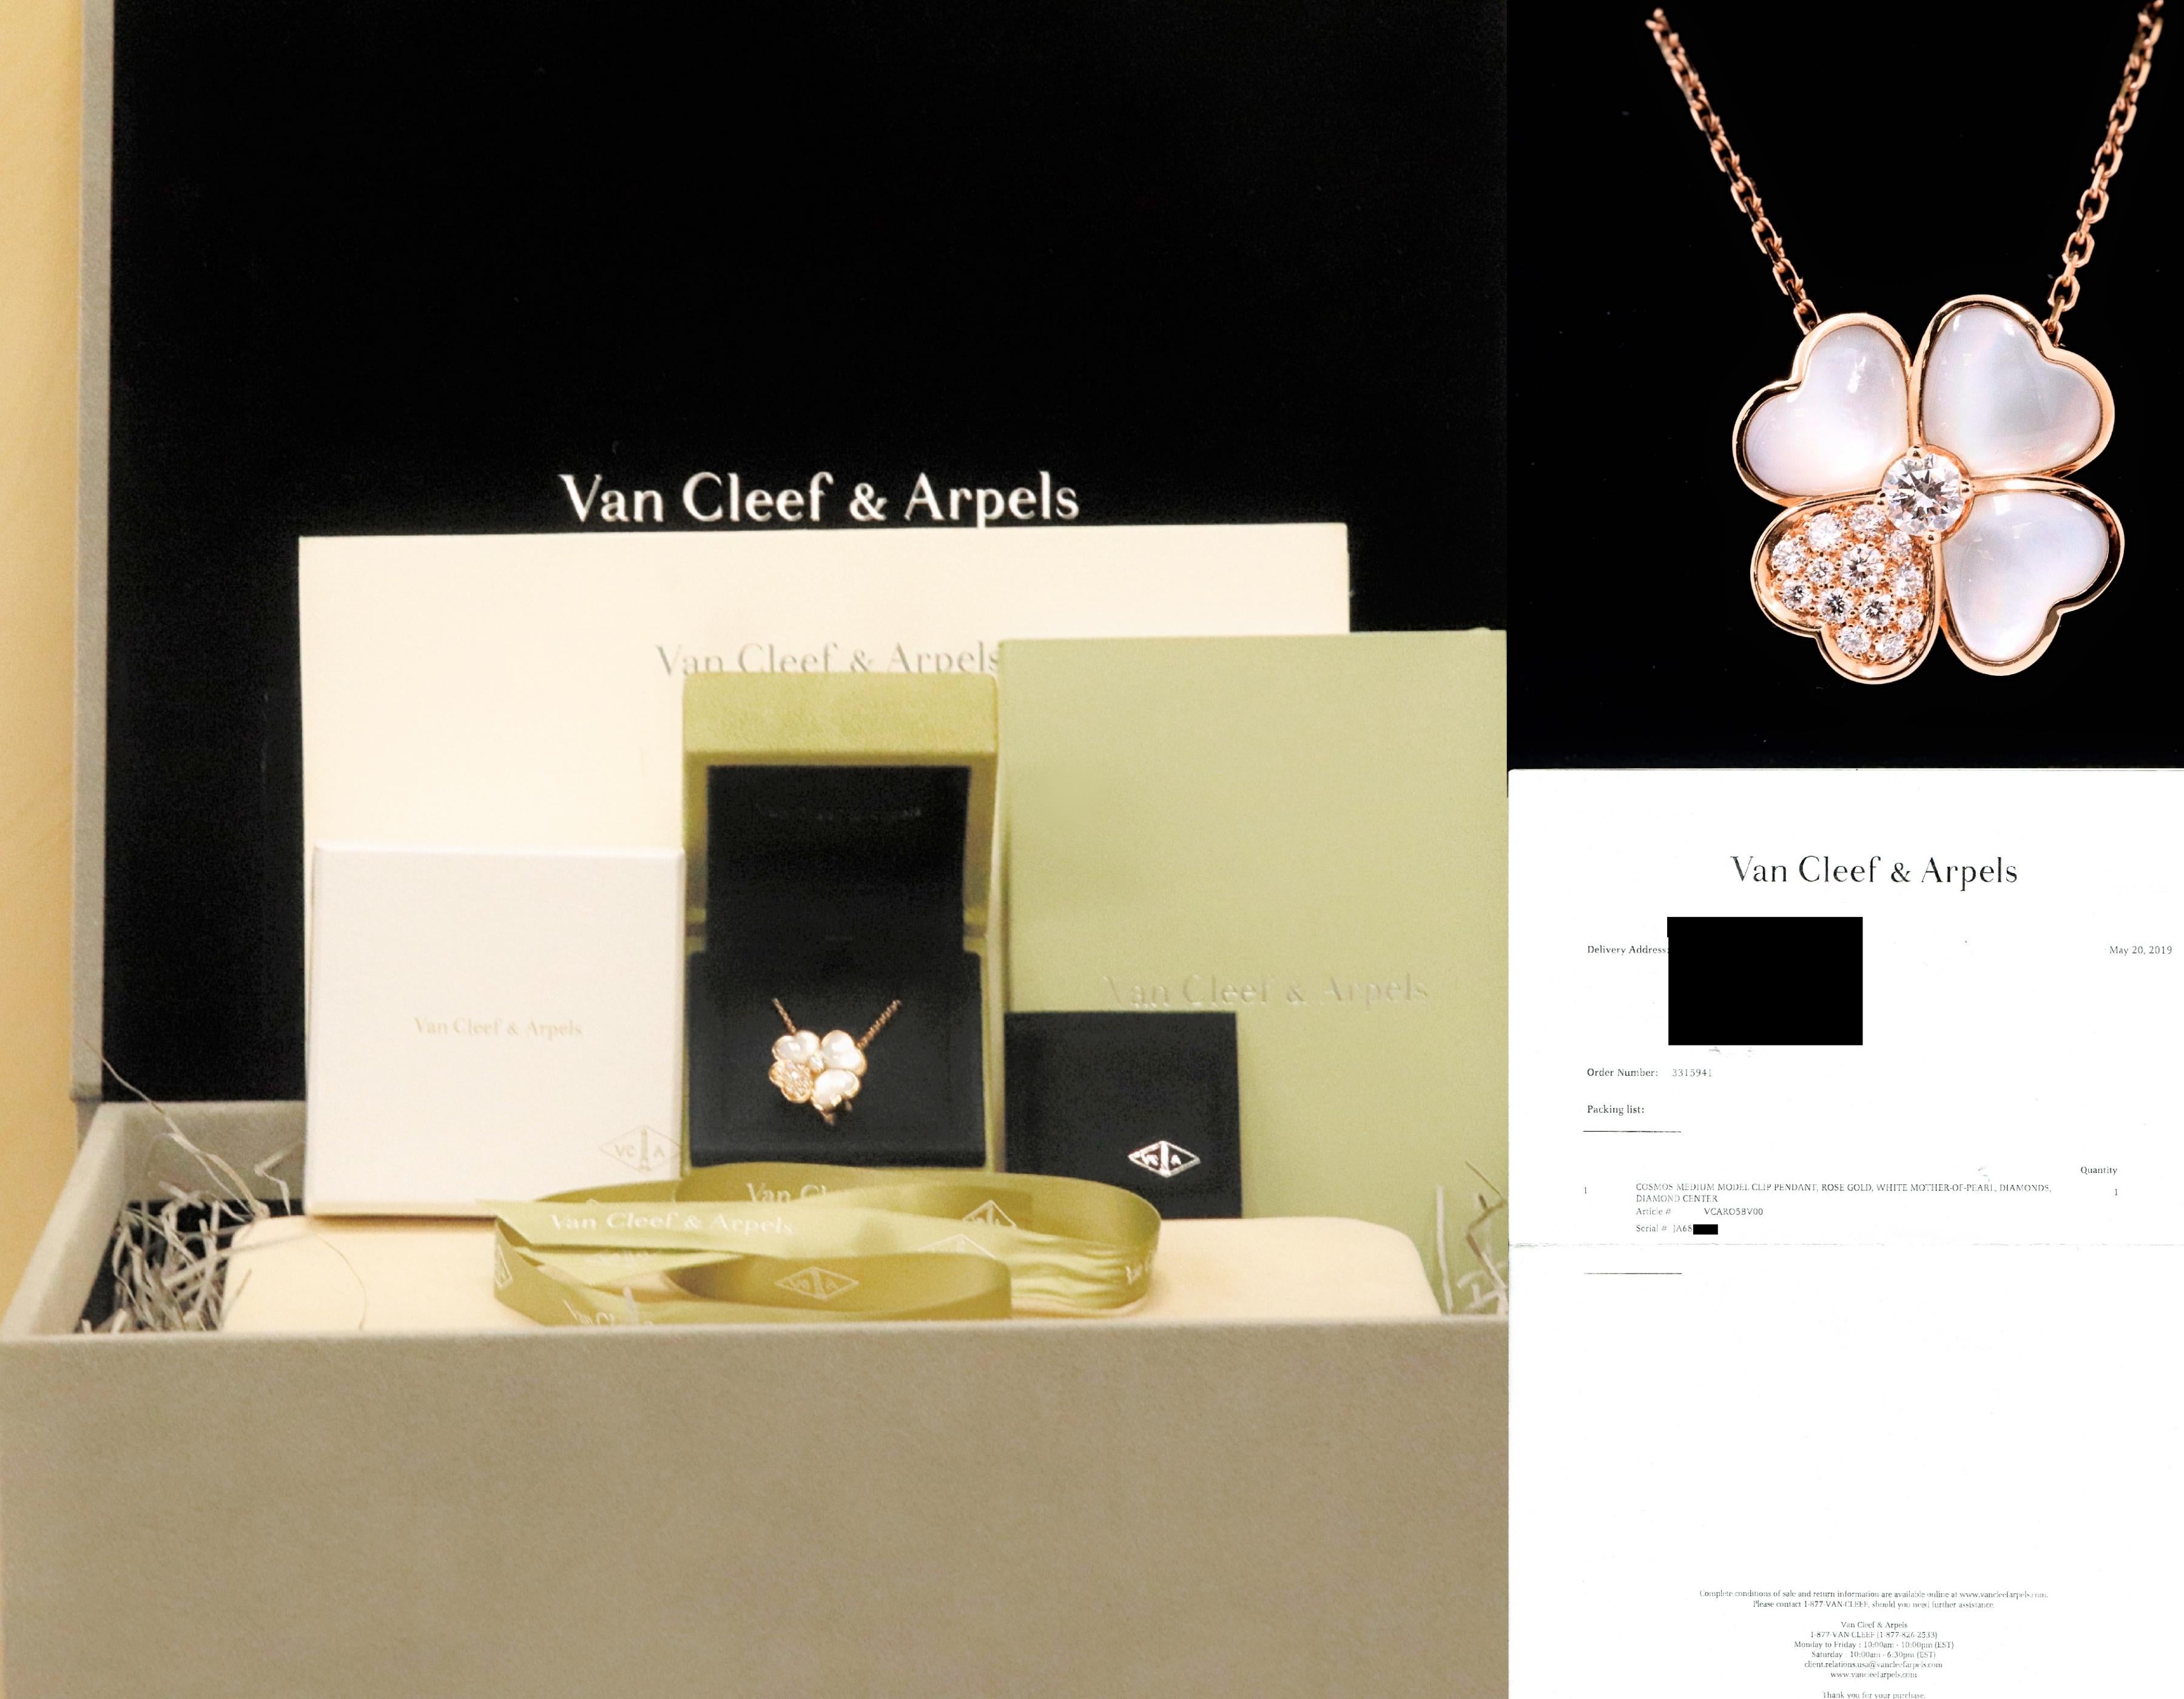 BRAND NEW Van Cleef & Arpels Cosmos Clip Pendant Necklace Full Set

Style:  Cosmos Four Leaf Clover Collection
Style Number:  Ref VCARO5BV00
Serial Number:  JA681***
Metal:  18kt Rose Gold
Size:  Medium
Length:  16.8 inches - adjustable
Total Carat